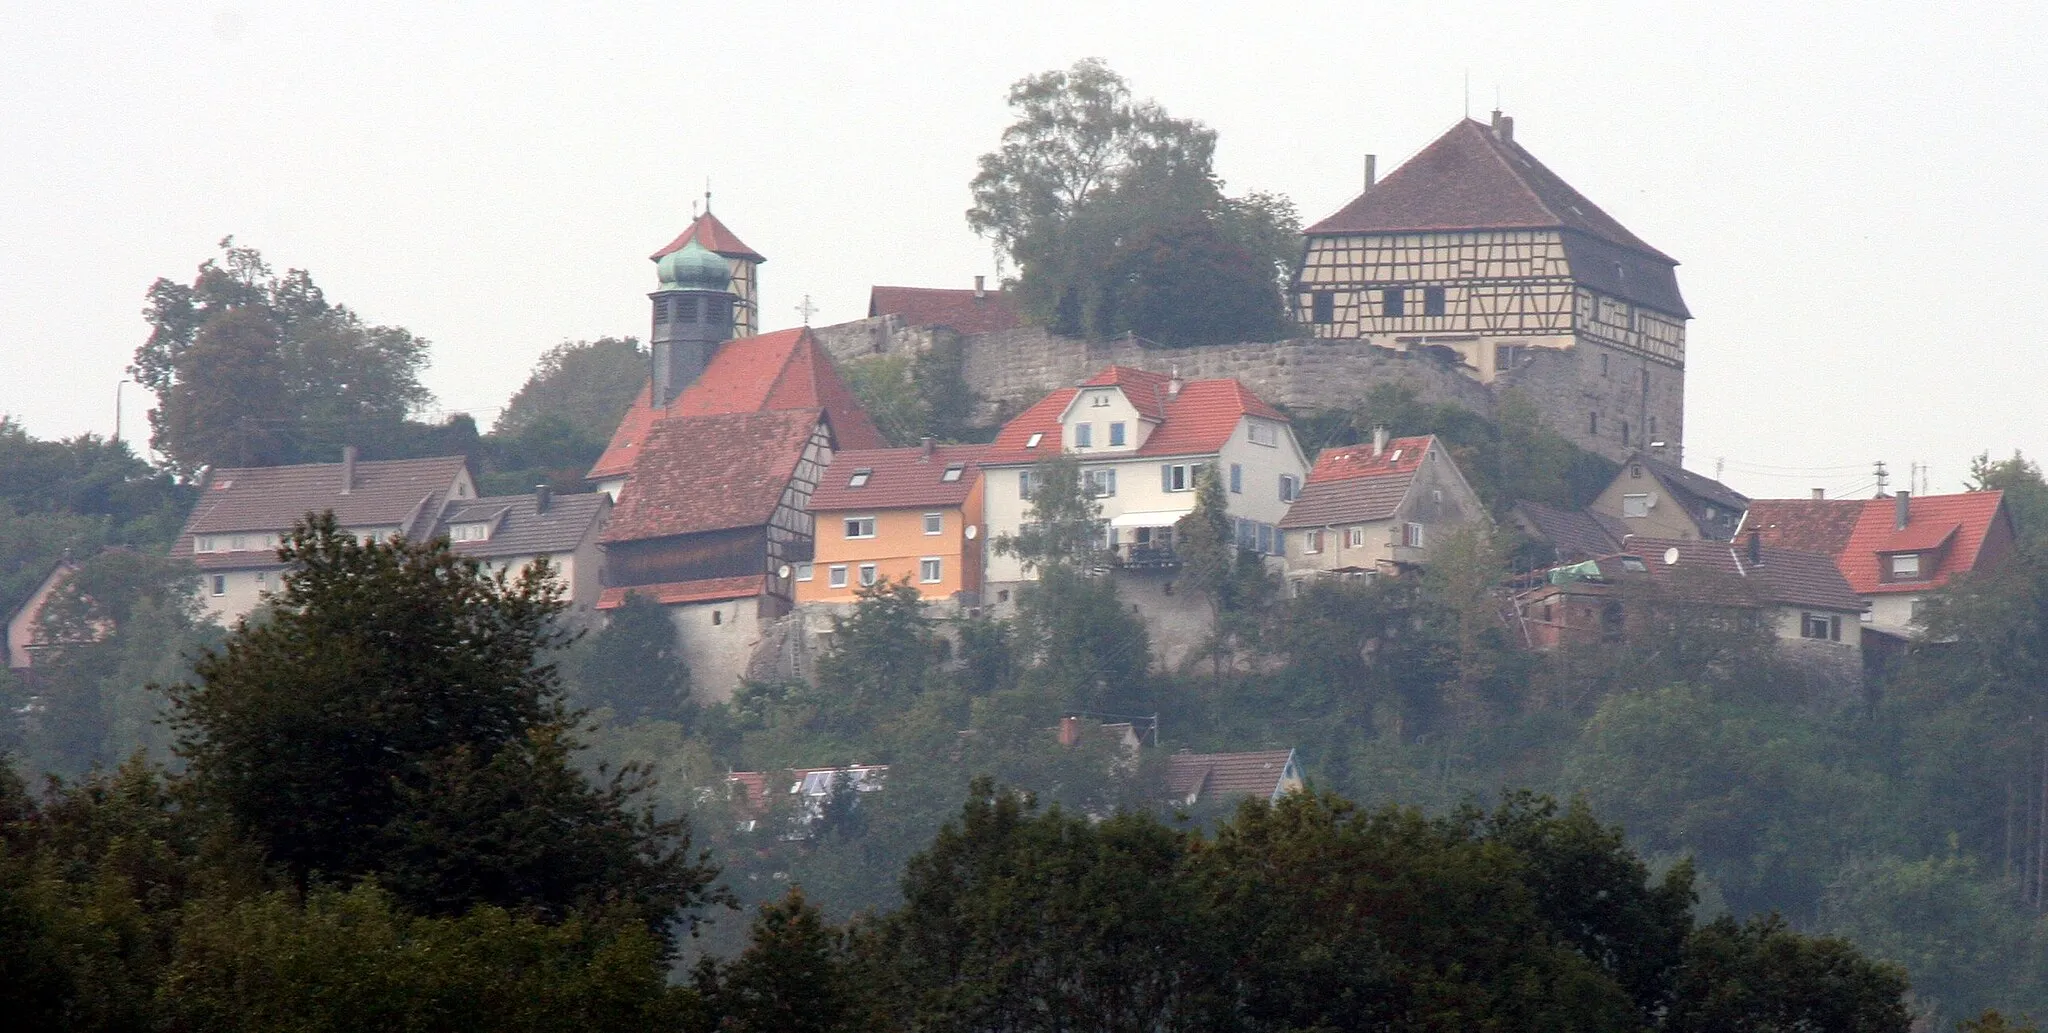 Photo showing: Maienfels castle in Wüstenrot-Maienfels, Germany as seen from the Brettach valley